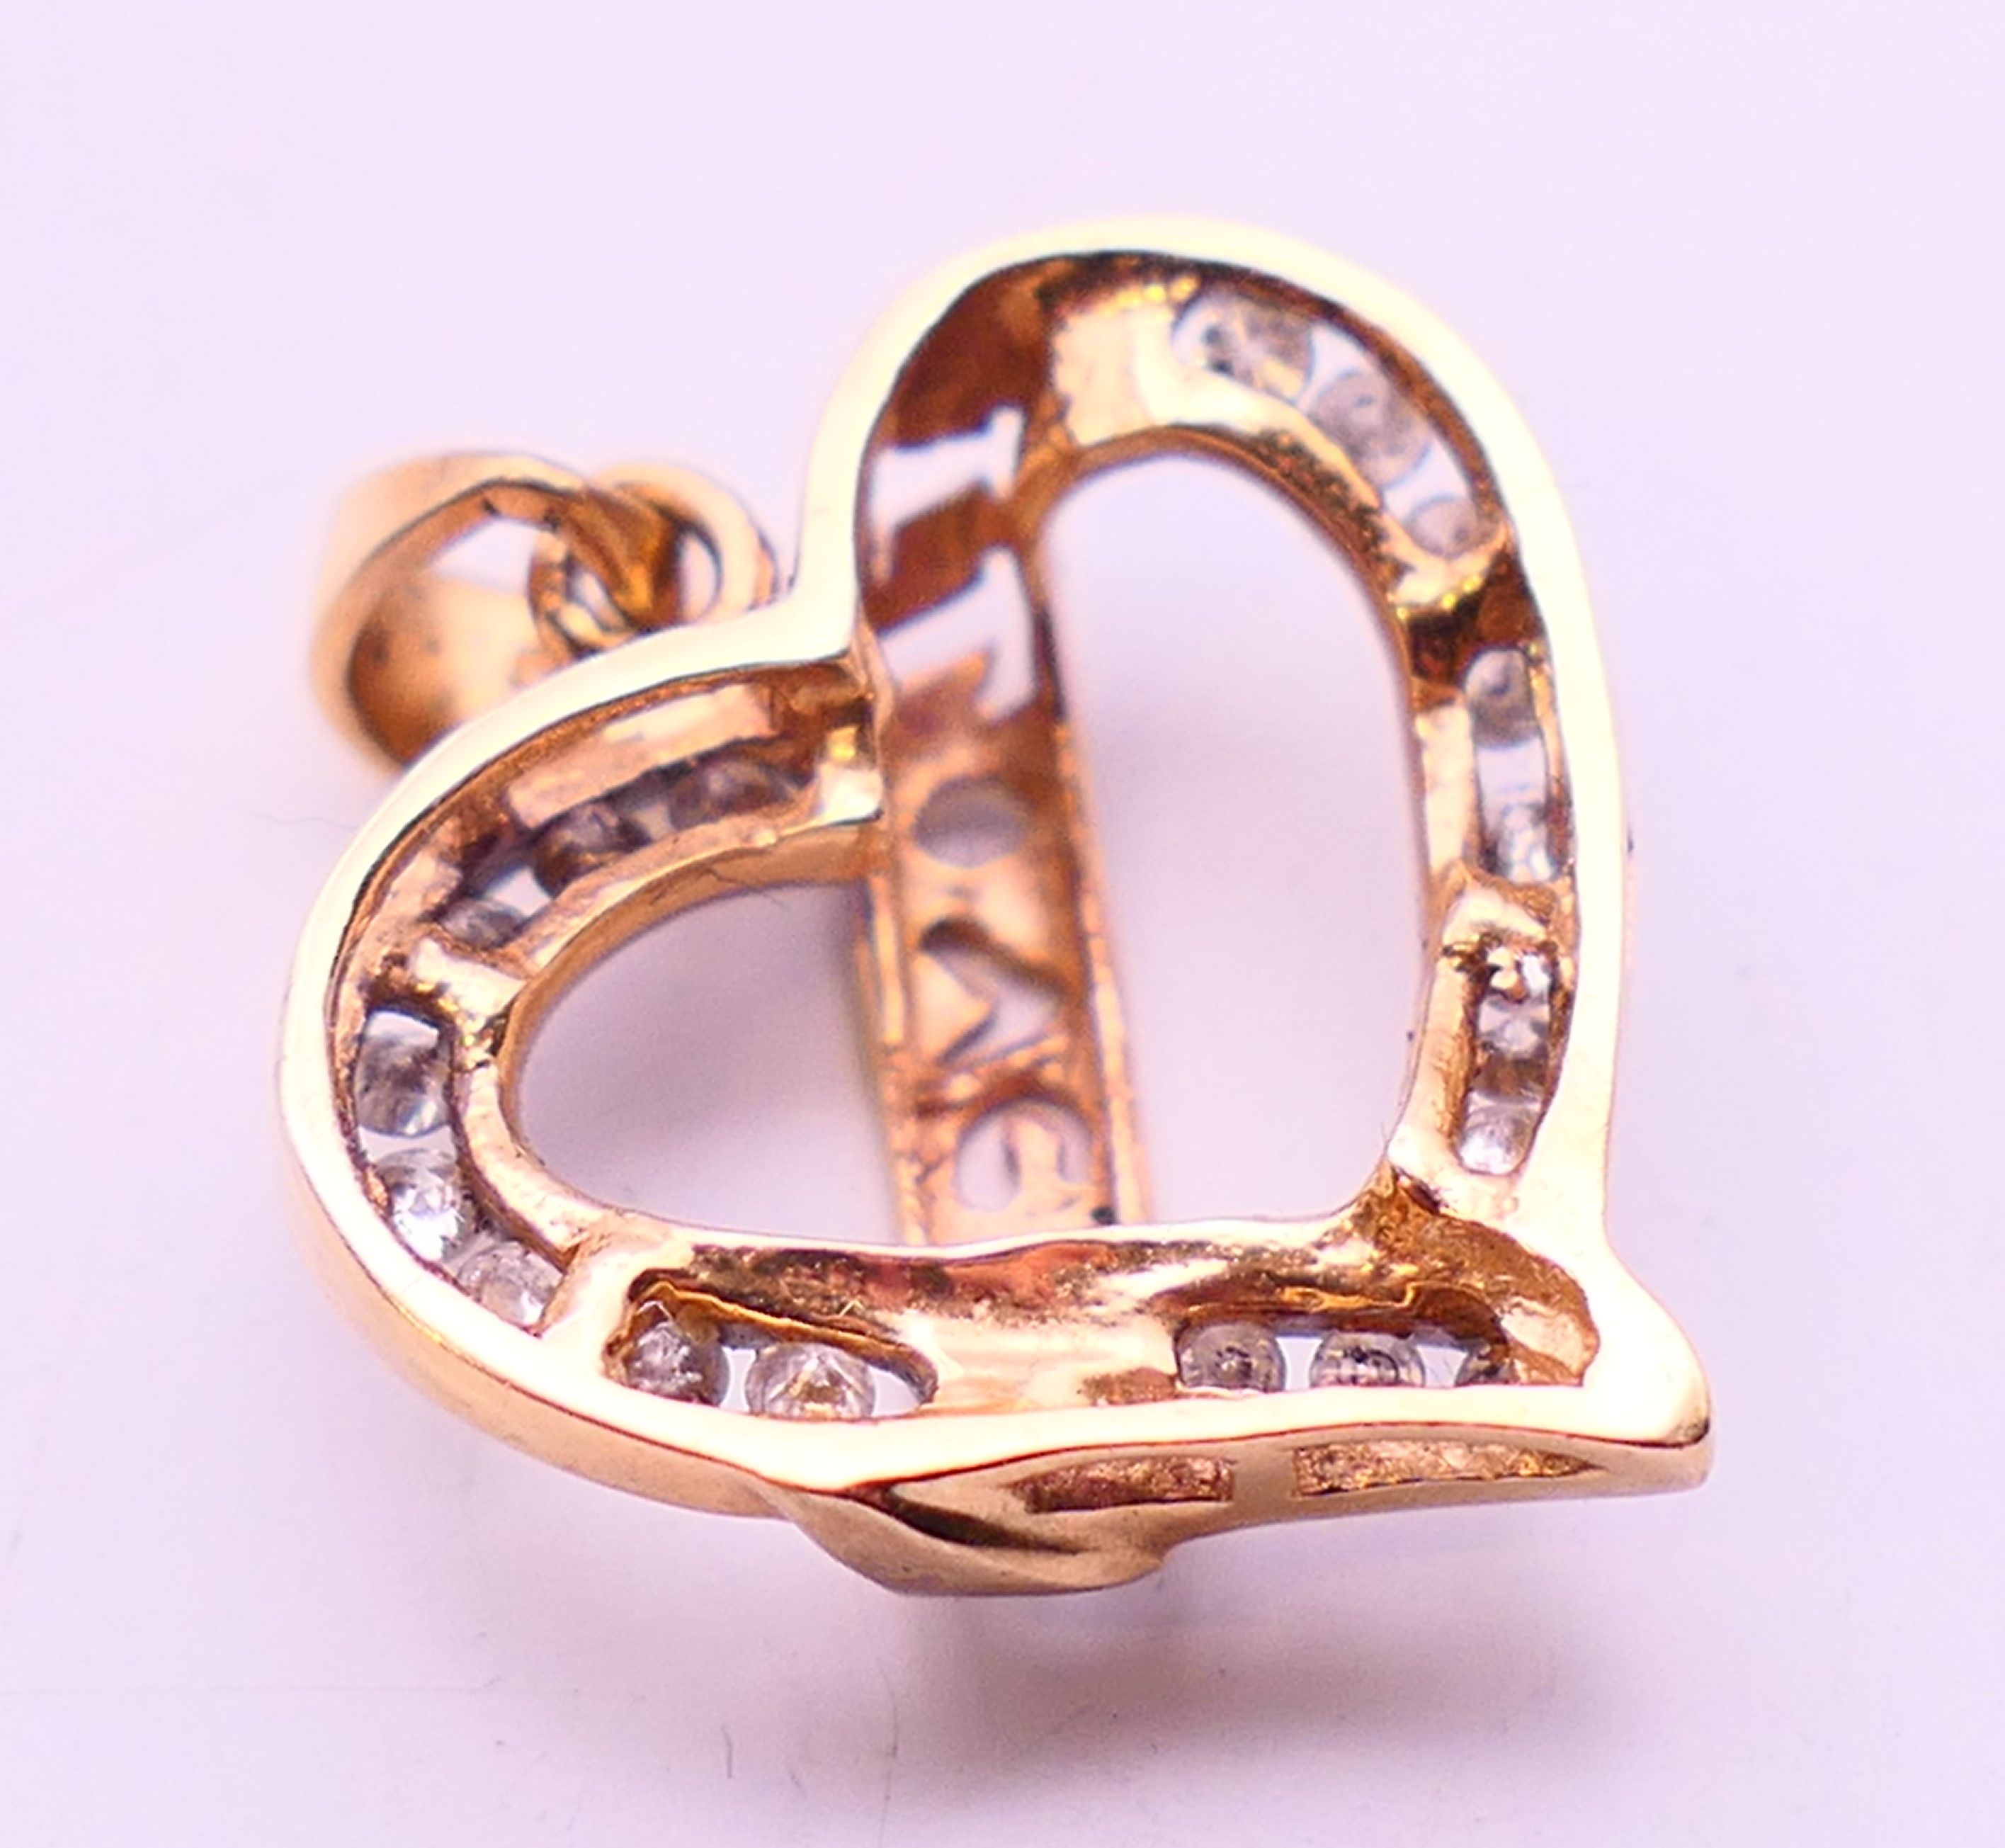 A 9 ct gold and diamond set 'I Love You' heart shaped pendant. 2.2 grammes. 2 cm high. - Image 4 of 4